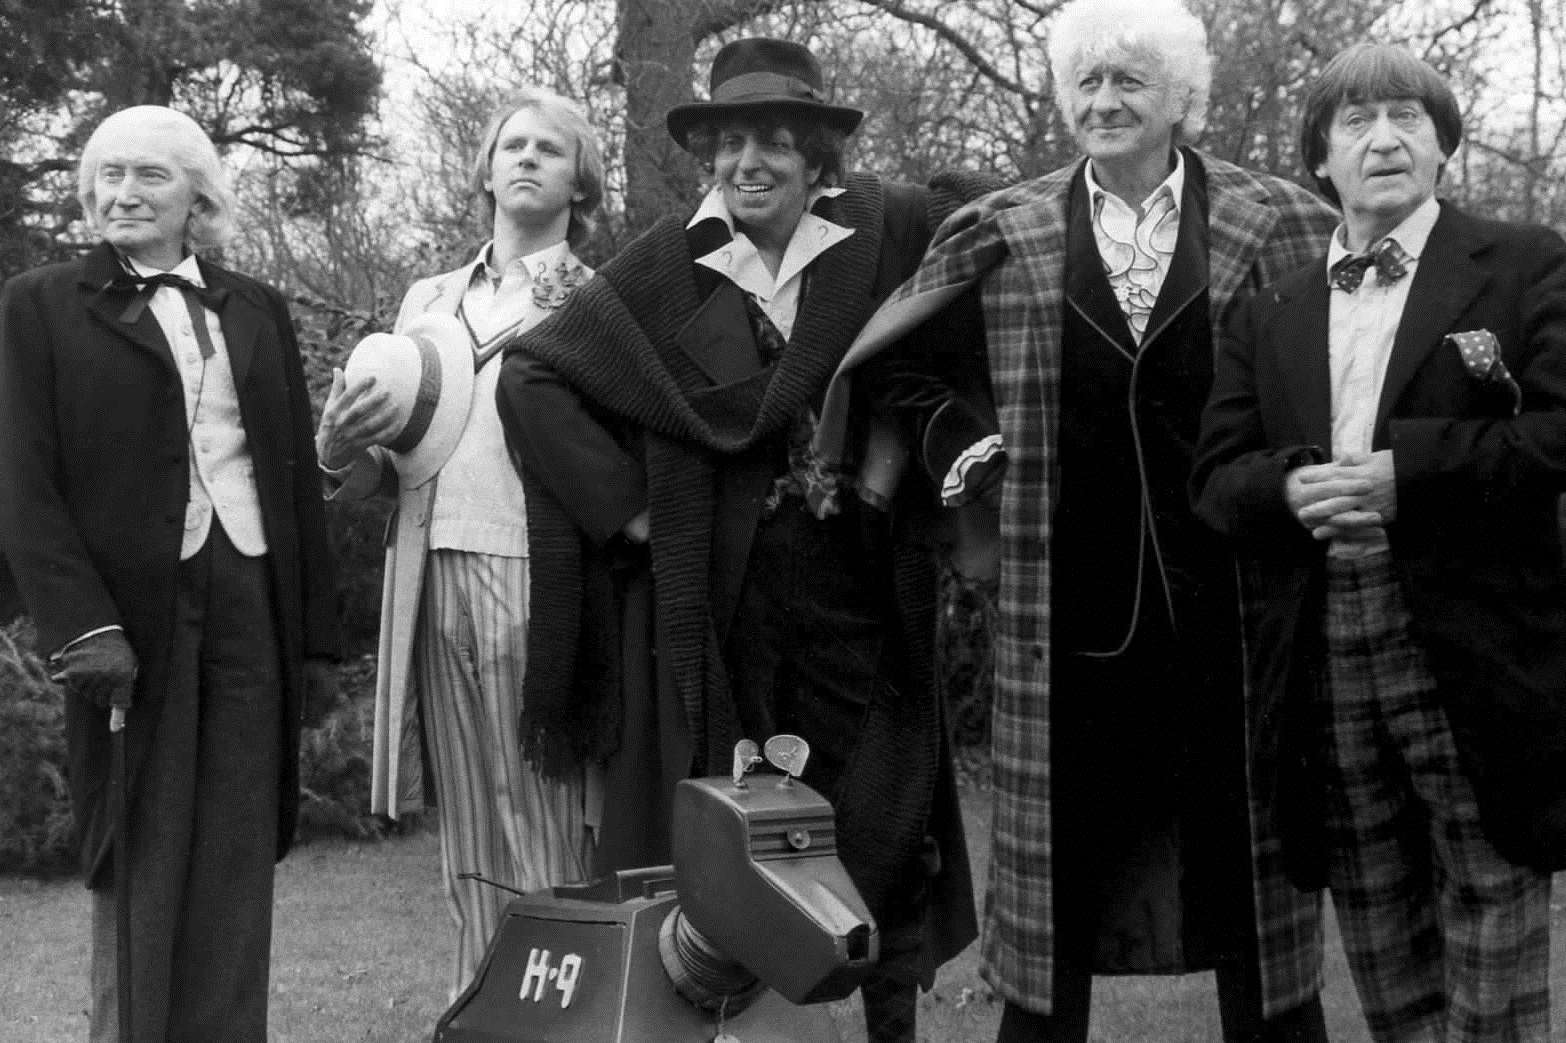 'The Five Doctors' was a celebration of the first 20 years of the world's longest-running science fiction series 'Doctor Who'. Peter Davision is joined in 1985 by his predecessors Patrick Troughton, Jon Pertwee and Tom Baker. The late William Hartnell, the orginal Doctor Who, is played by Richard Hurndall.